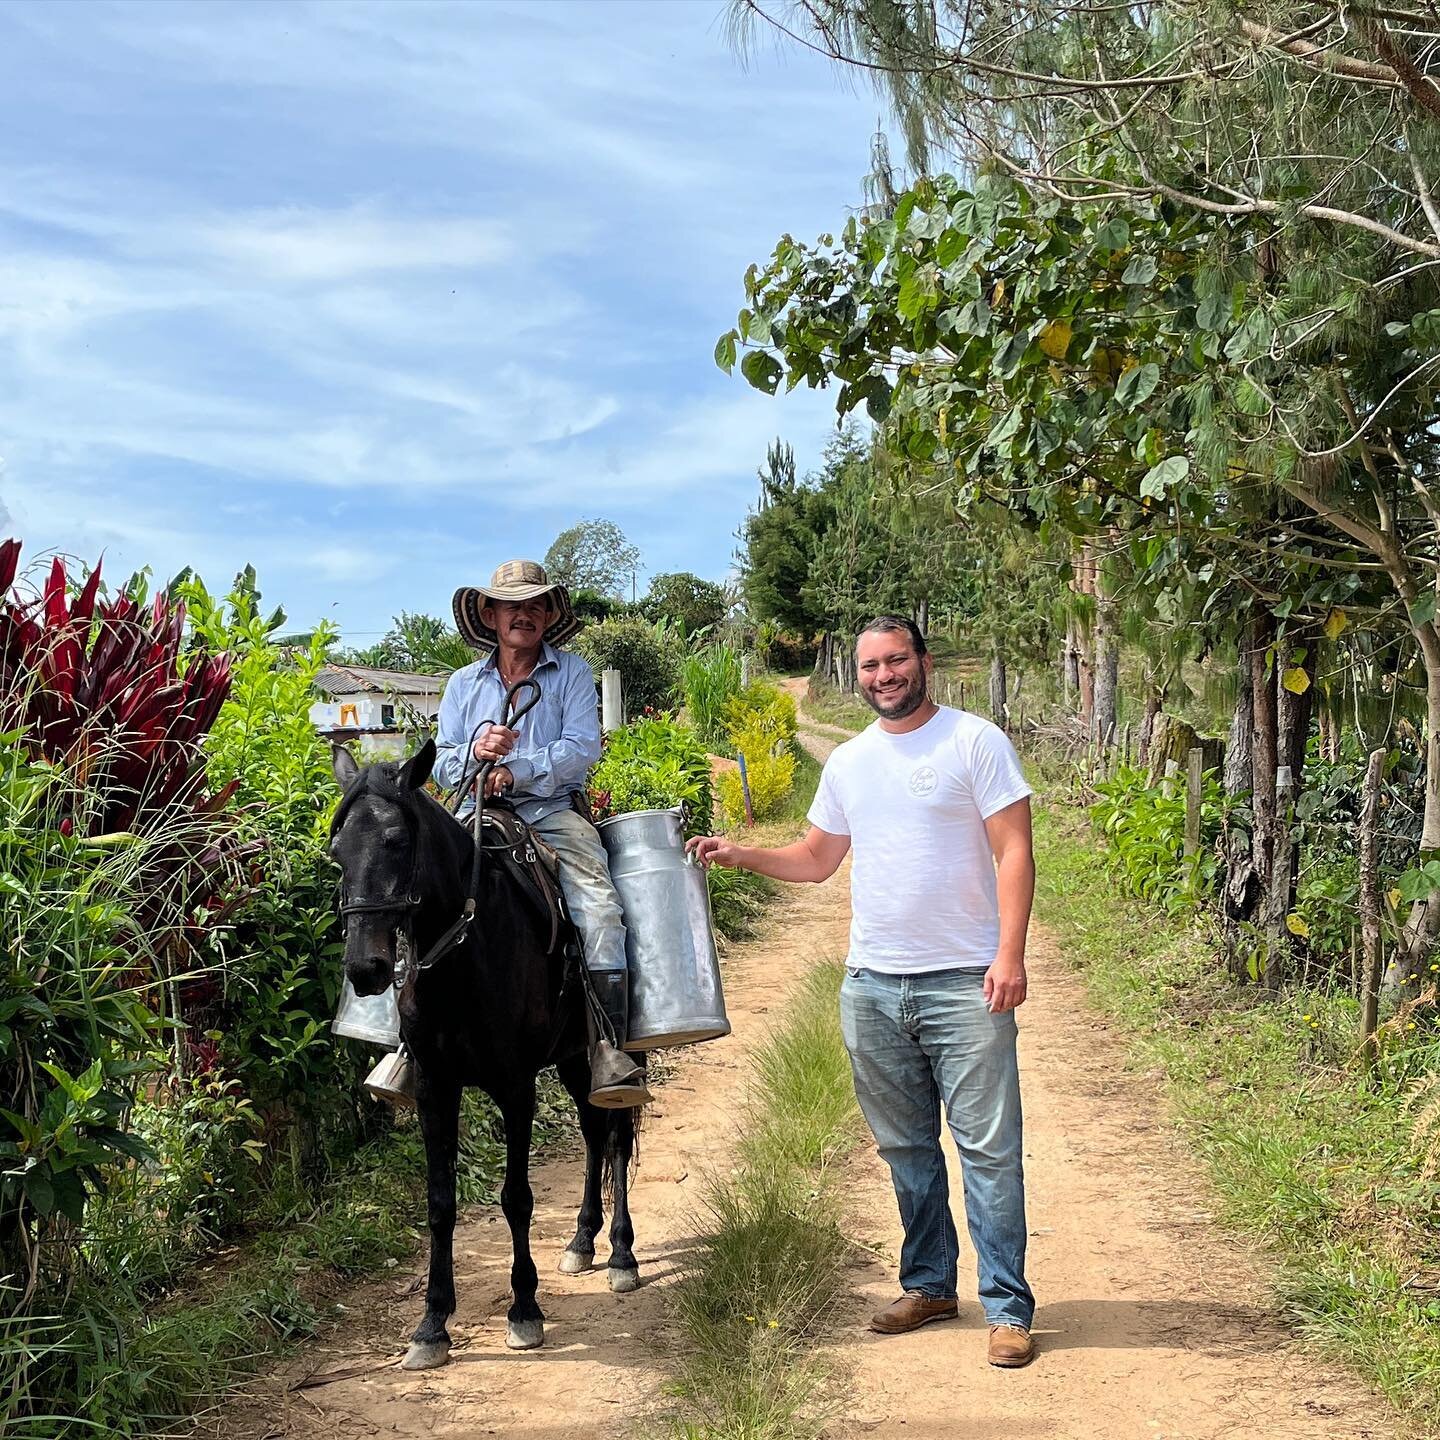 Saying hello 👋 to our neighbor who lives off the same road where our farm, San Sebasti&aacute;n, is located in Angostura, Antioquia. 

He was on the way to catch the milk truck so it can pasteurize the milk he has from his cows in the &ldquo;cantina